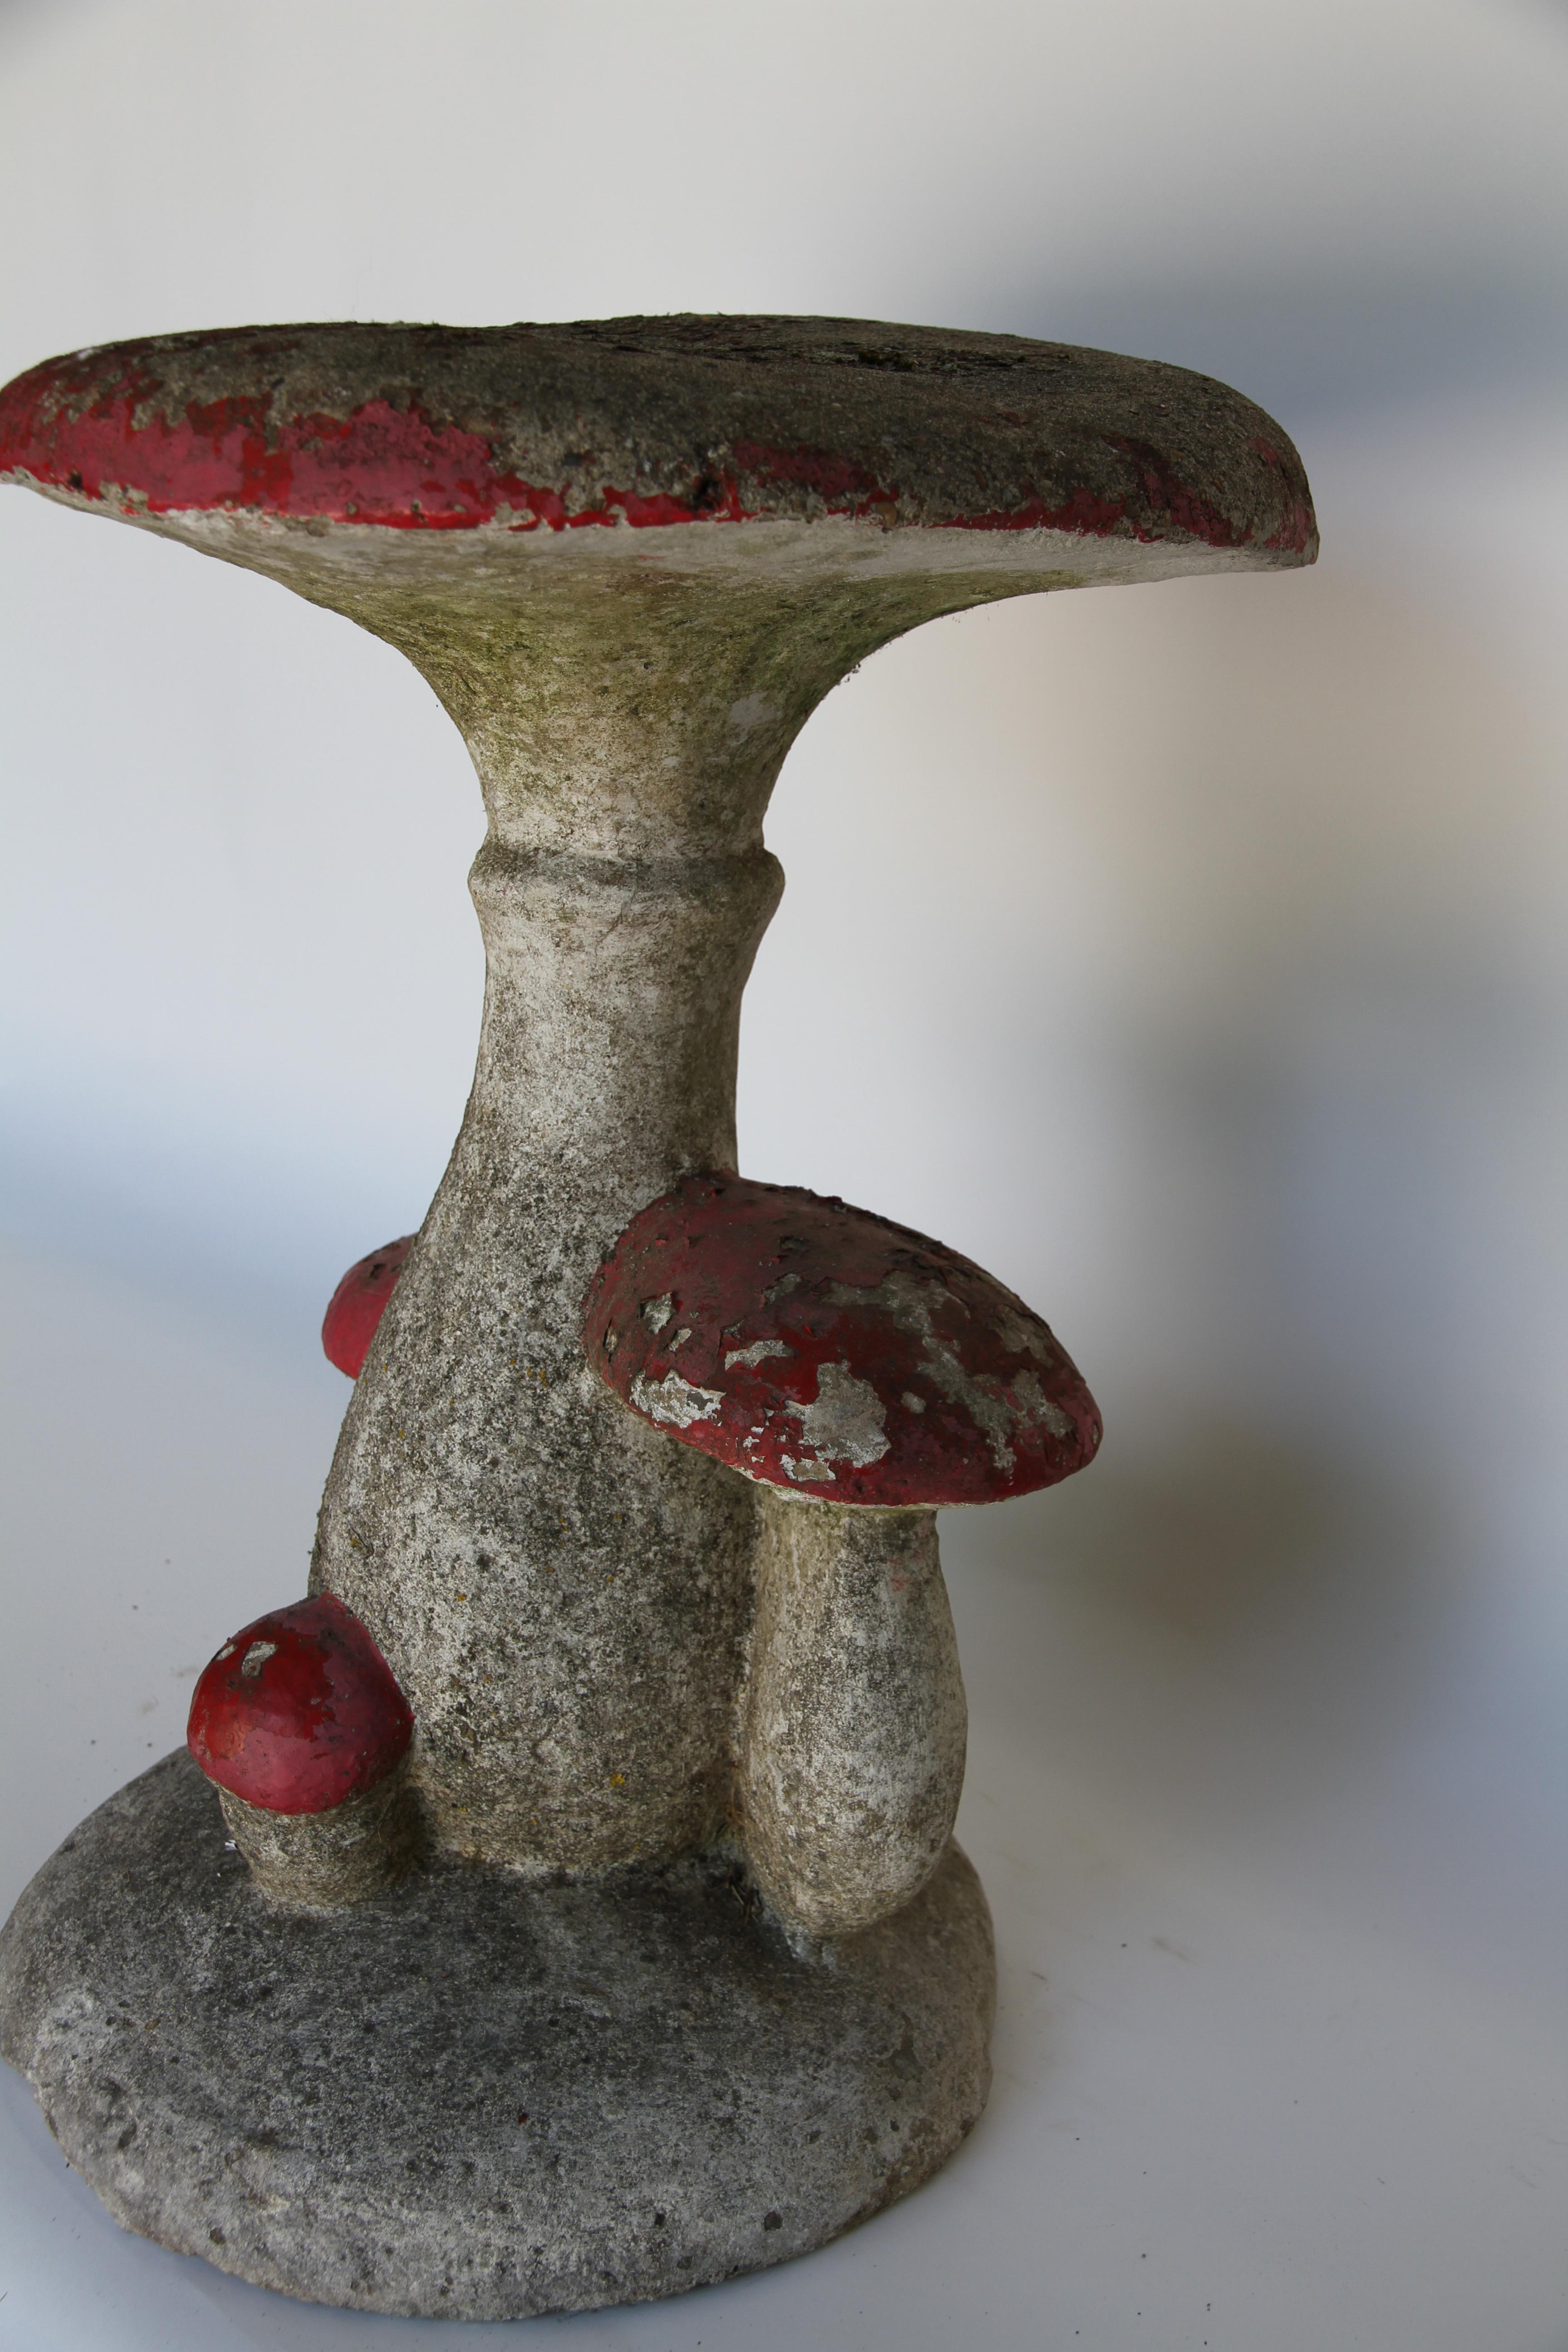 Found in France, this cement cluster of mushrooms serves well as a whimsical garden element or could be used as an unique end table.